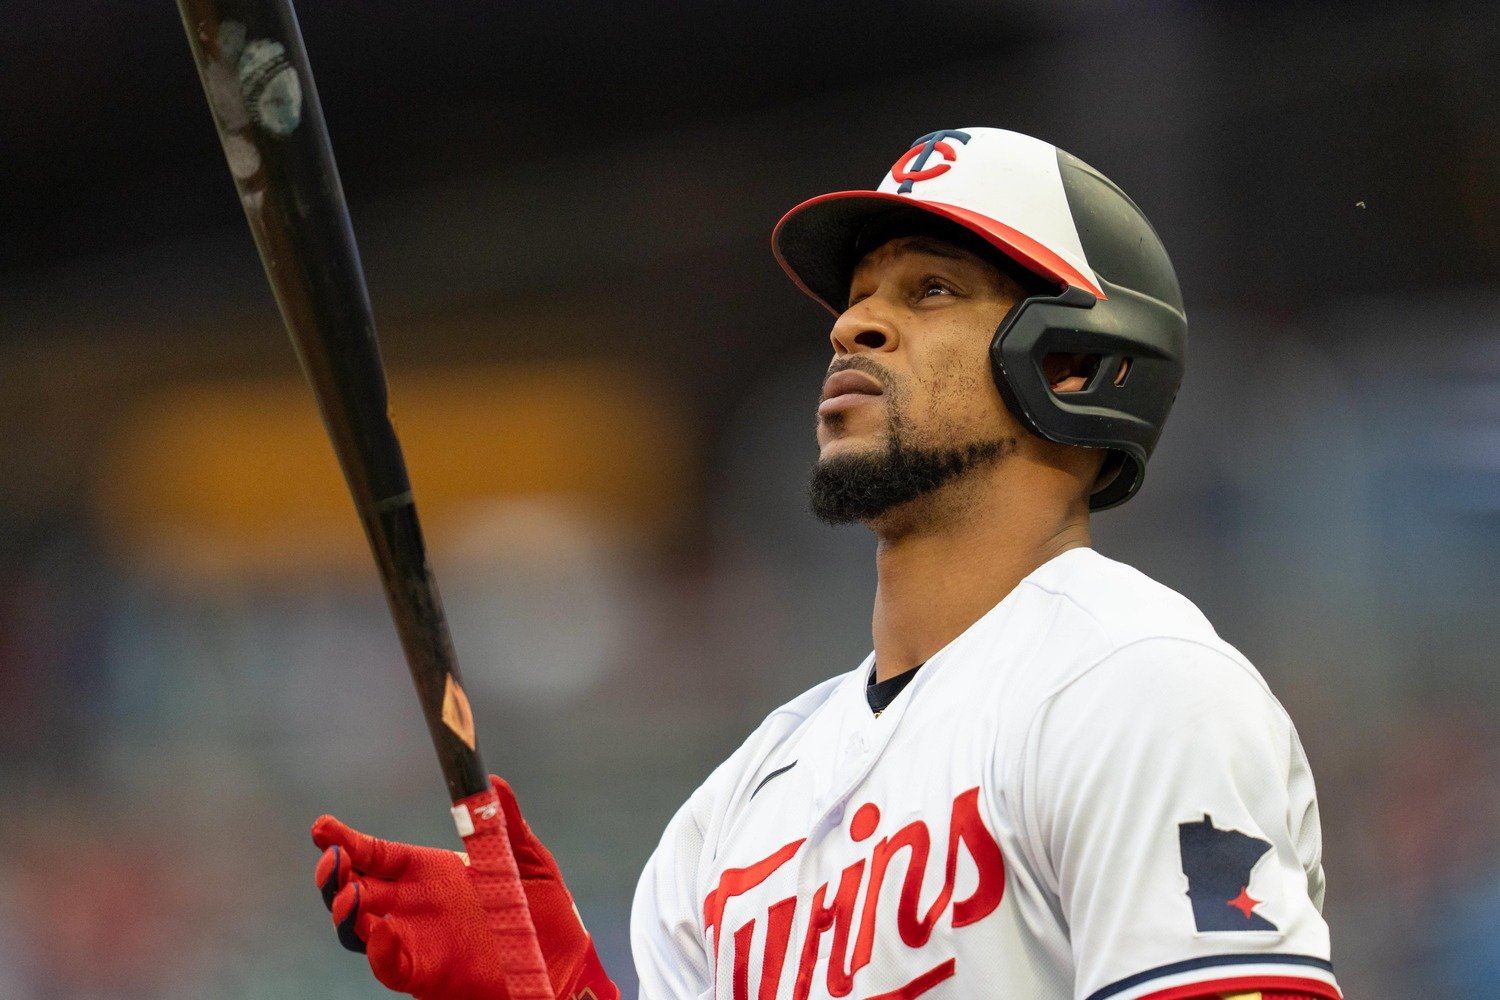 Finally Healthy, Byron Buxton's Tools Helped Him Reach His First